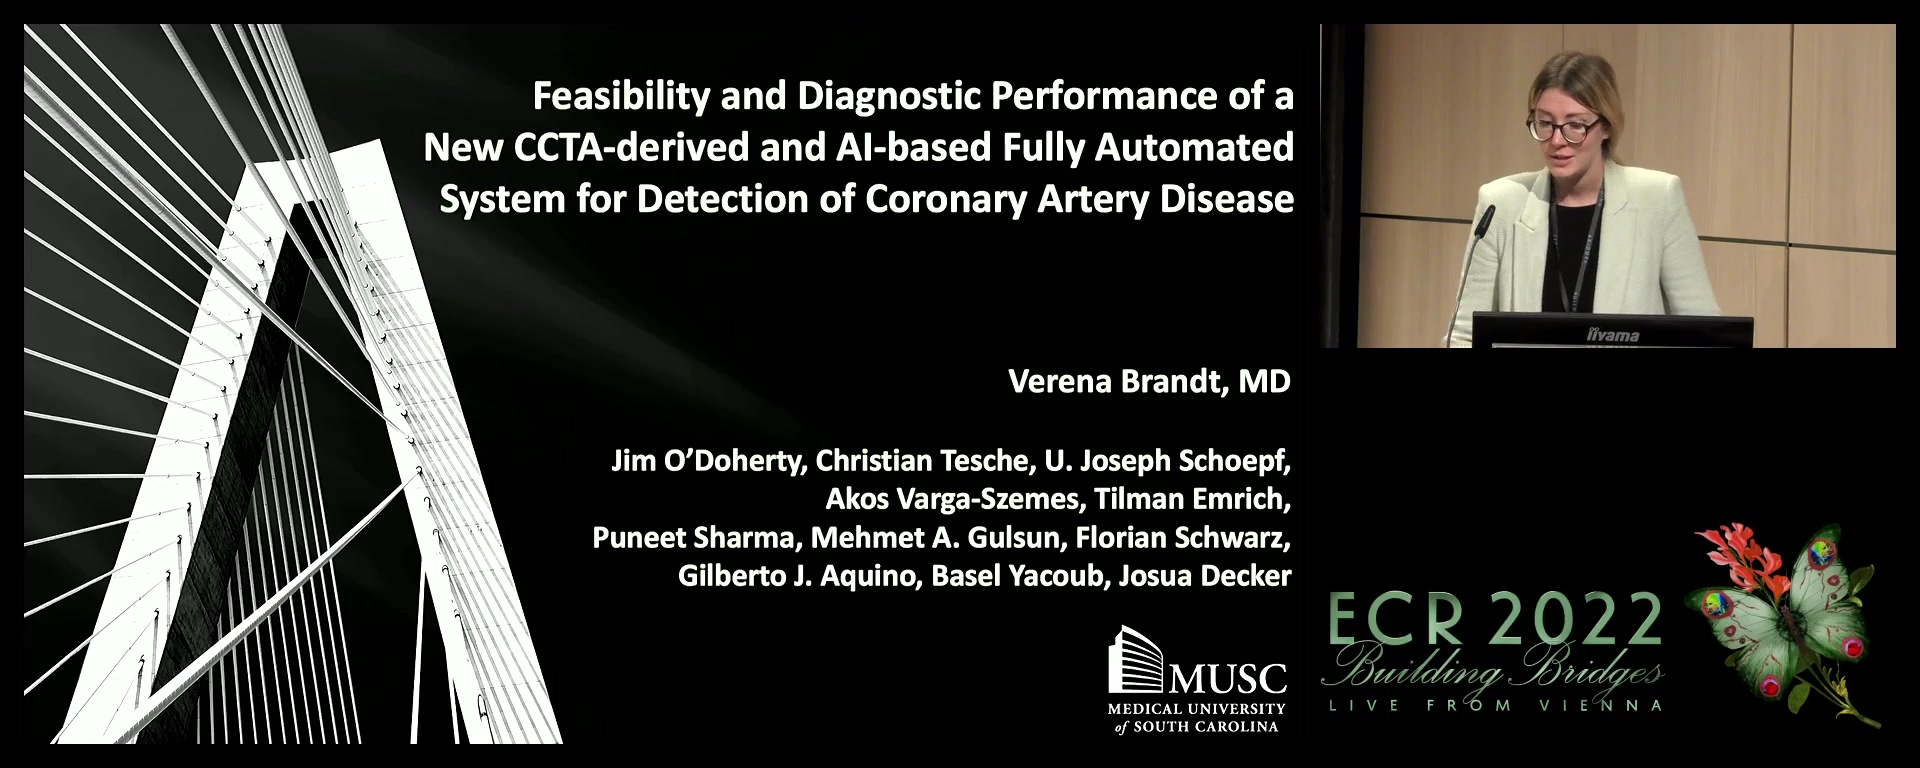 Feasibility and diagnostic performance of a new CCTA-derived and AI-based fully automated system for detection of coronary artery disease - Verena Brandt, Charleston / US